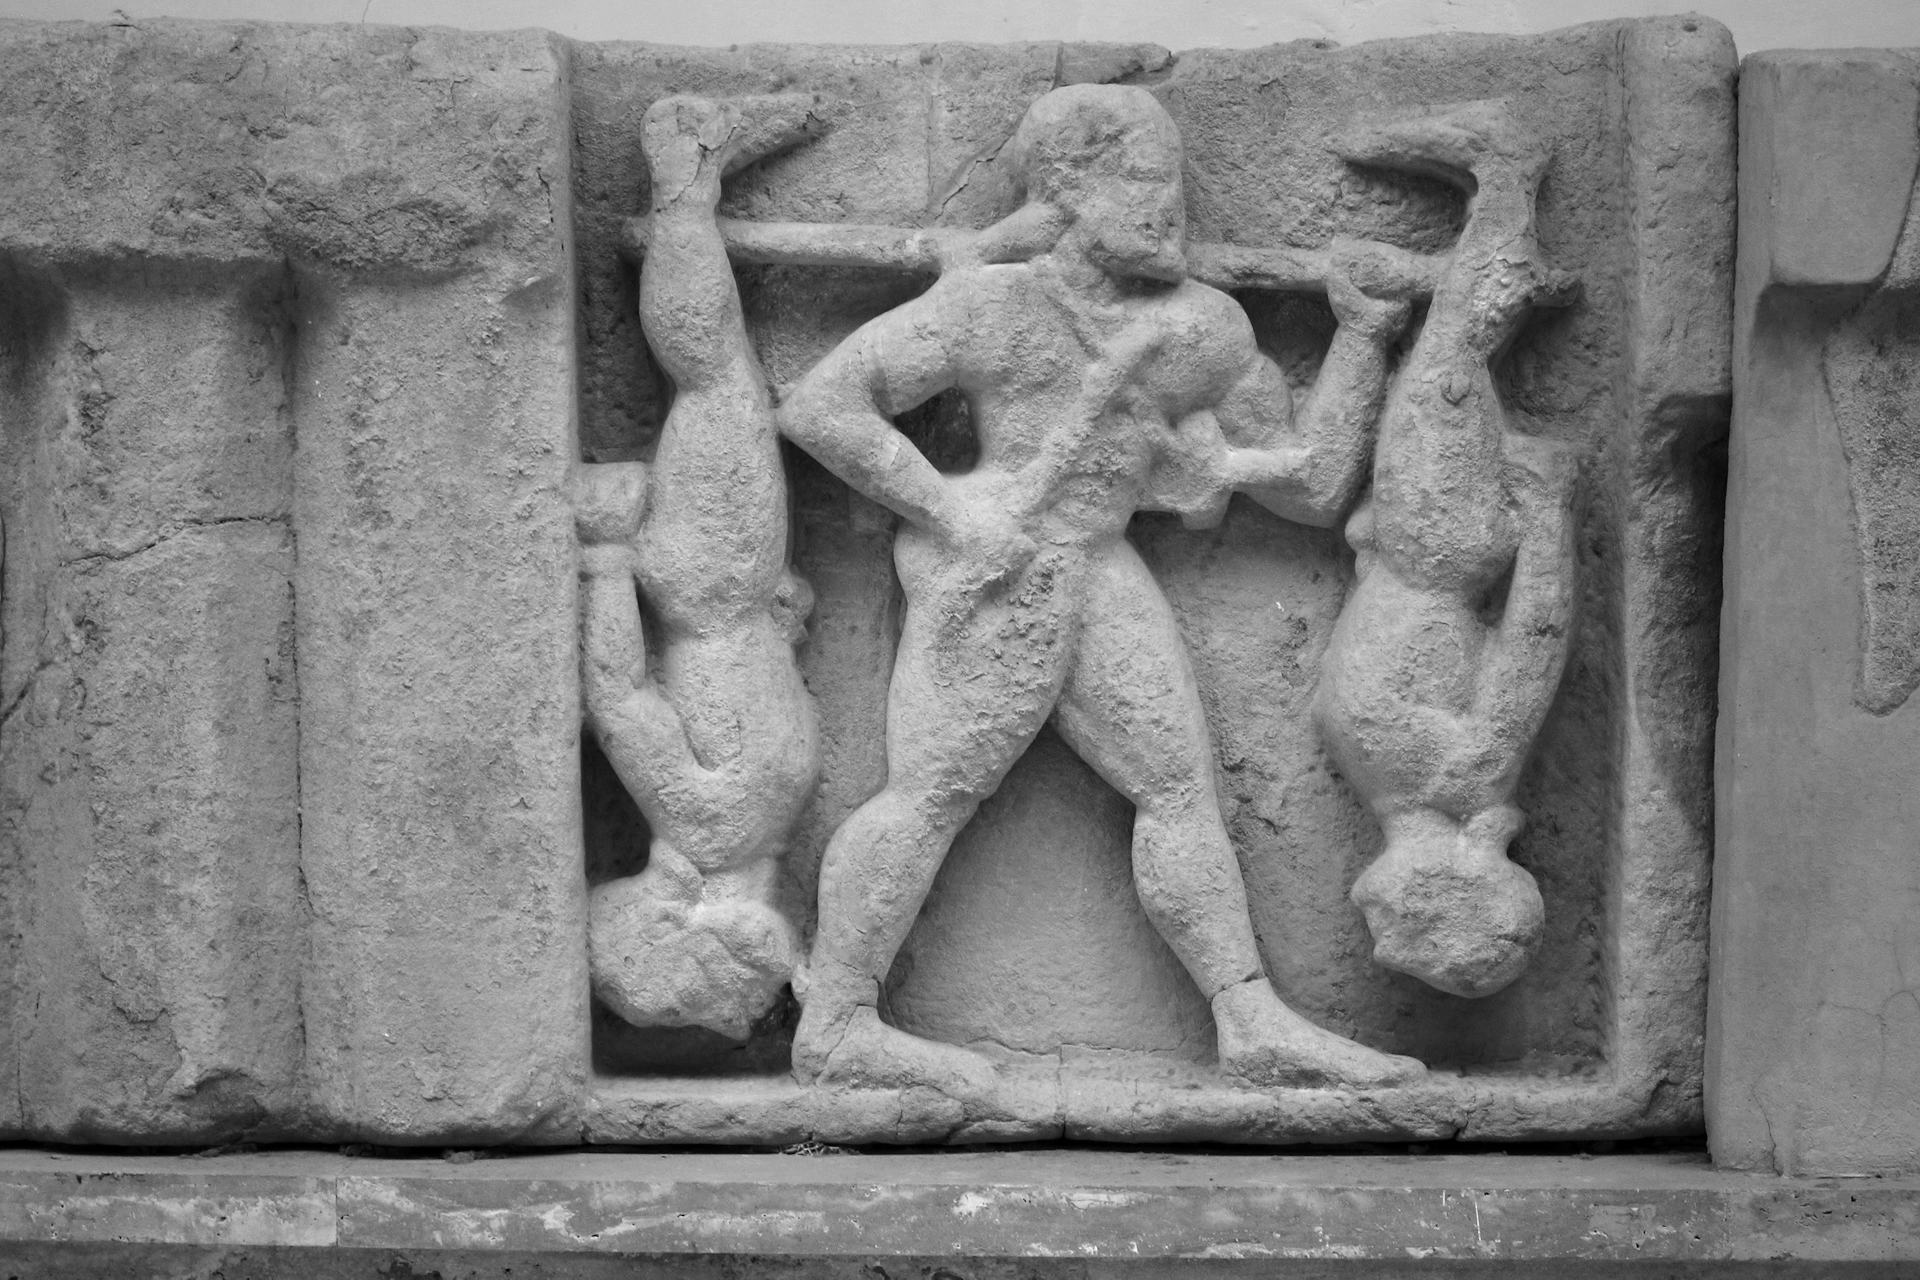 Metope relief showing the Cercopes captured by Heracles